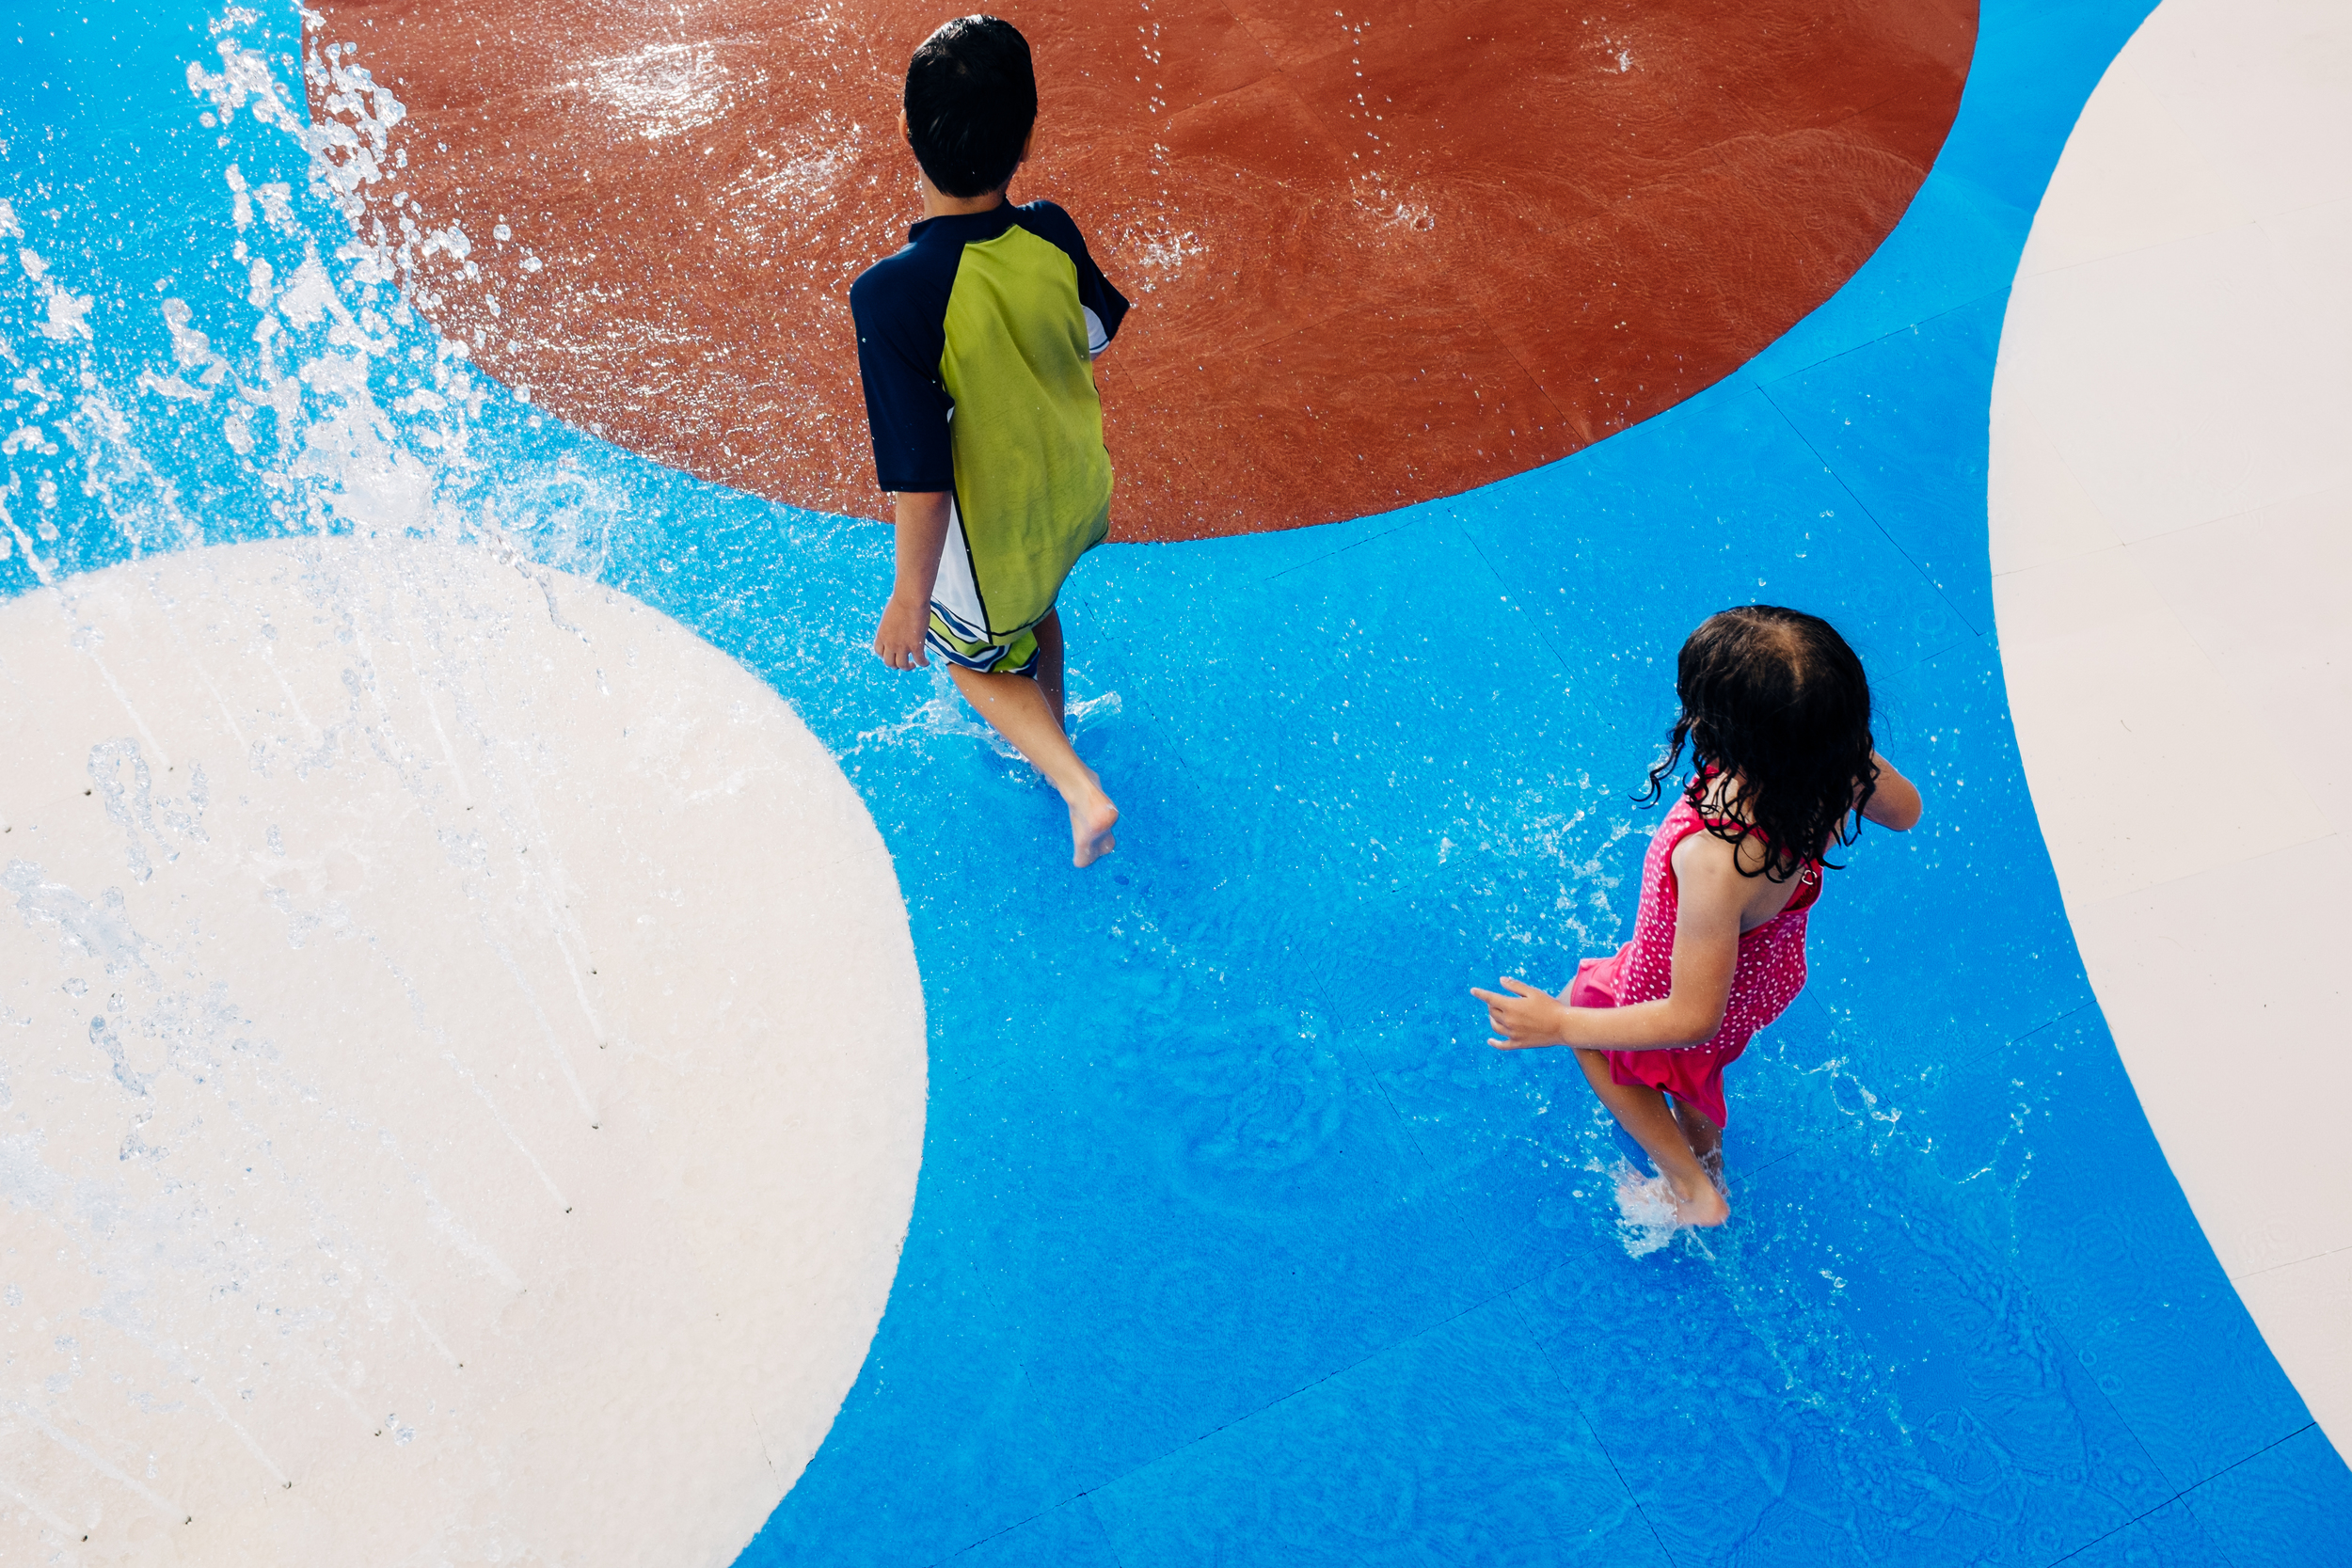 What is a splash pad?